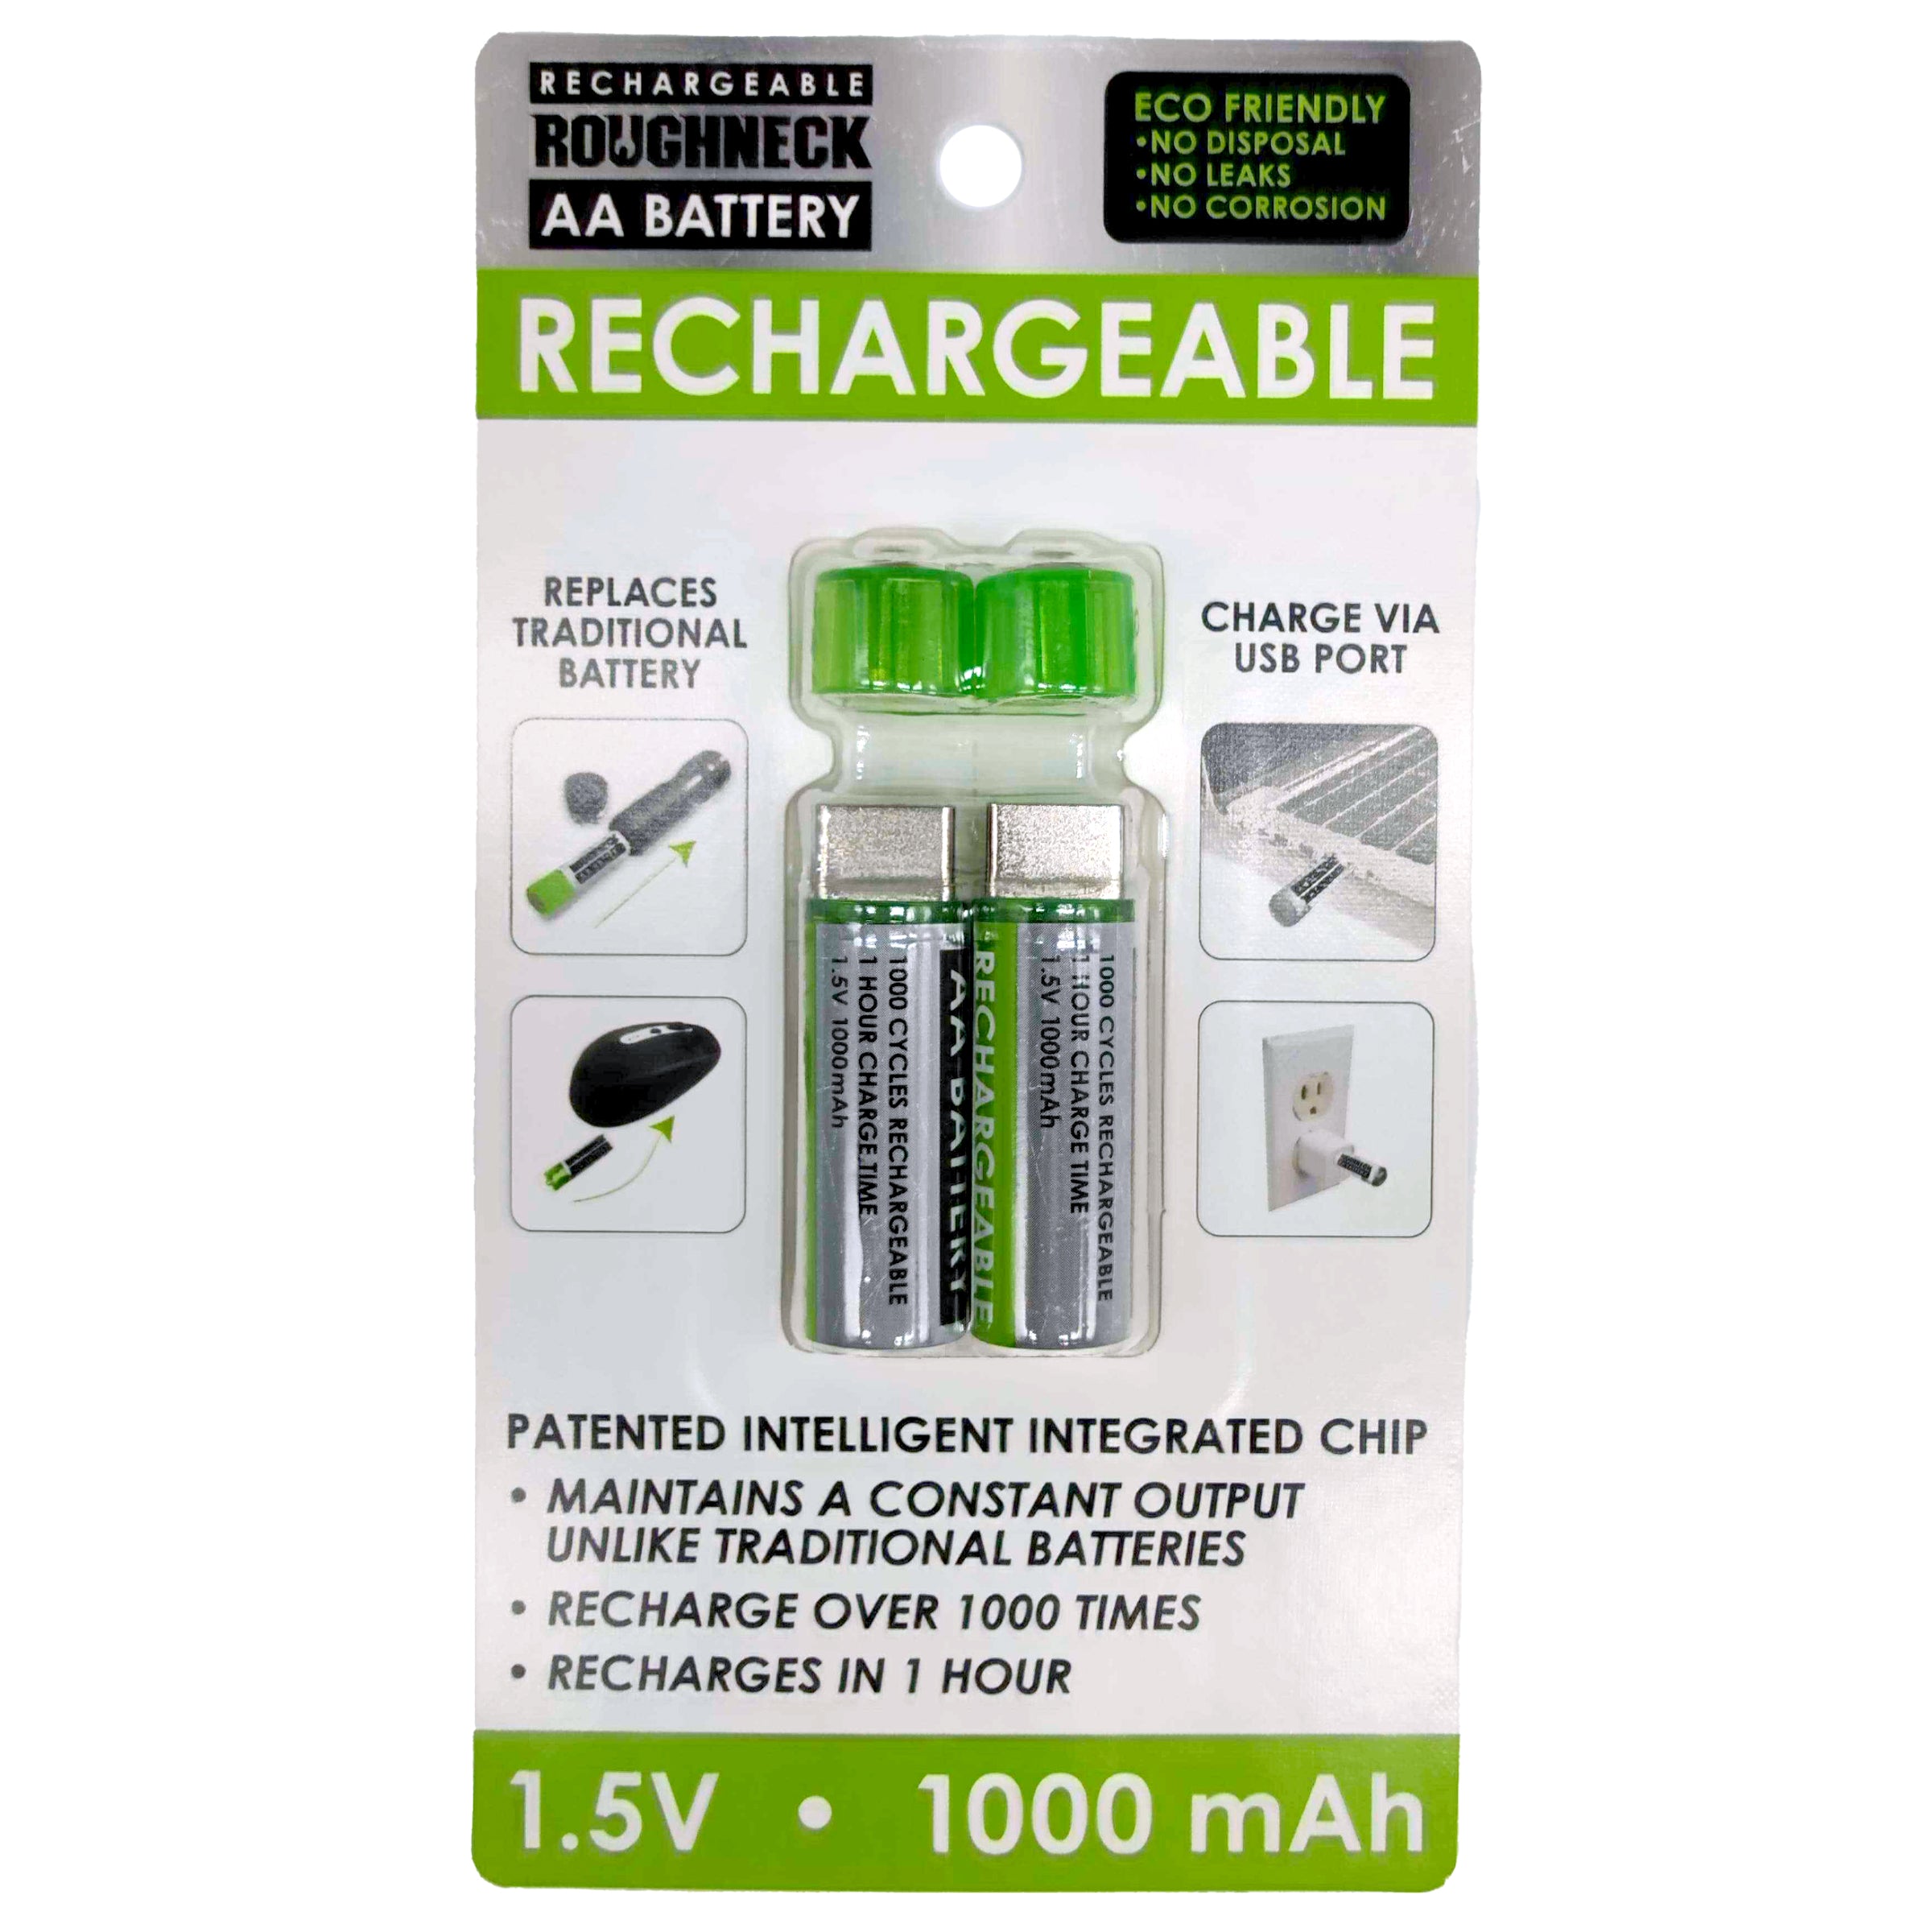 WHOLESALE ROUGHNECK RECHARGEABLE AA BATTERY 12 PIECES PER DISPLAY 2270 –  NOVELTY INC WHOLESALE